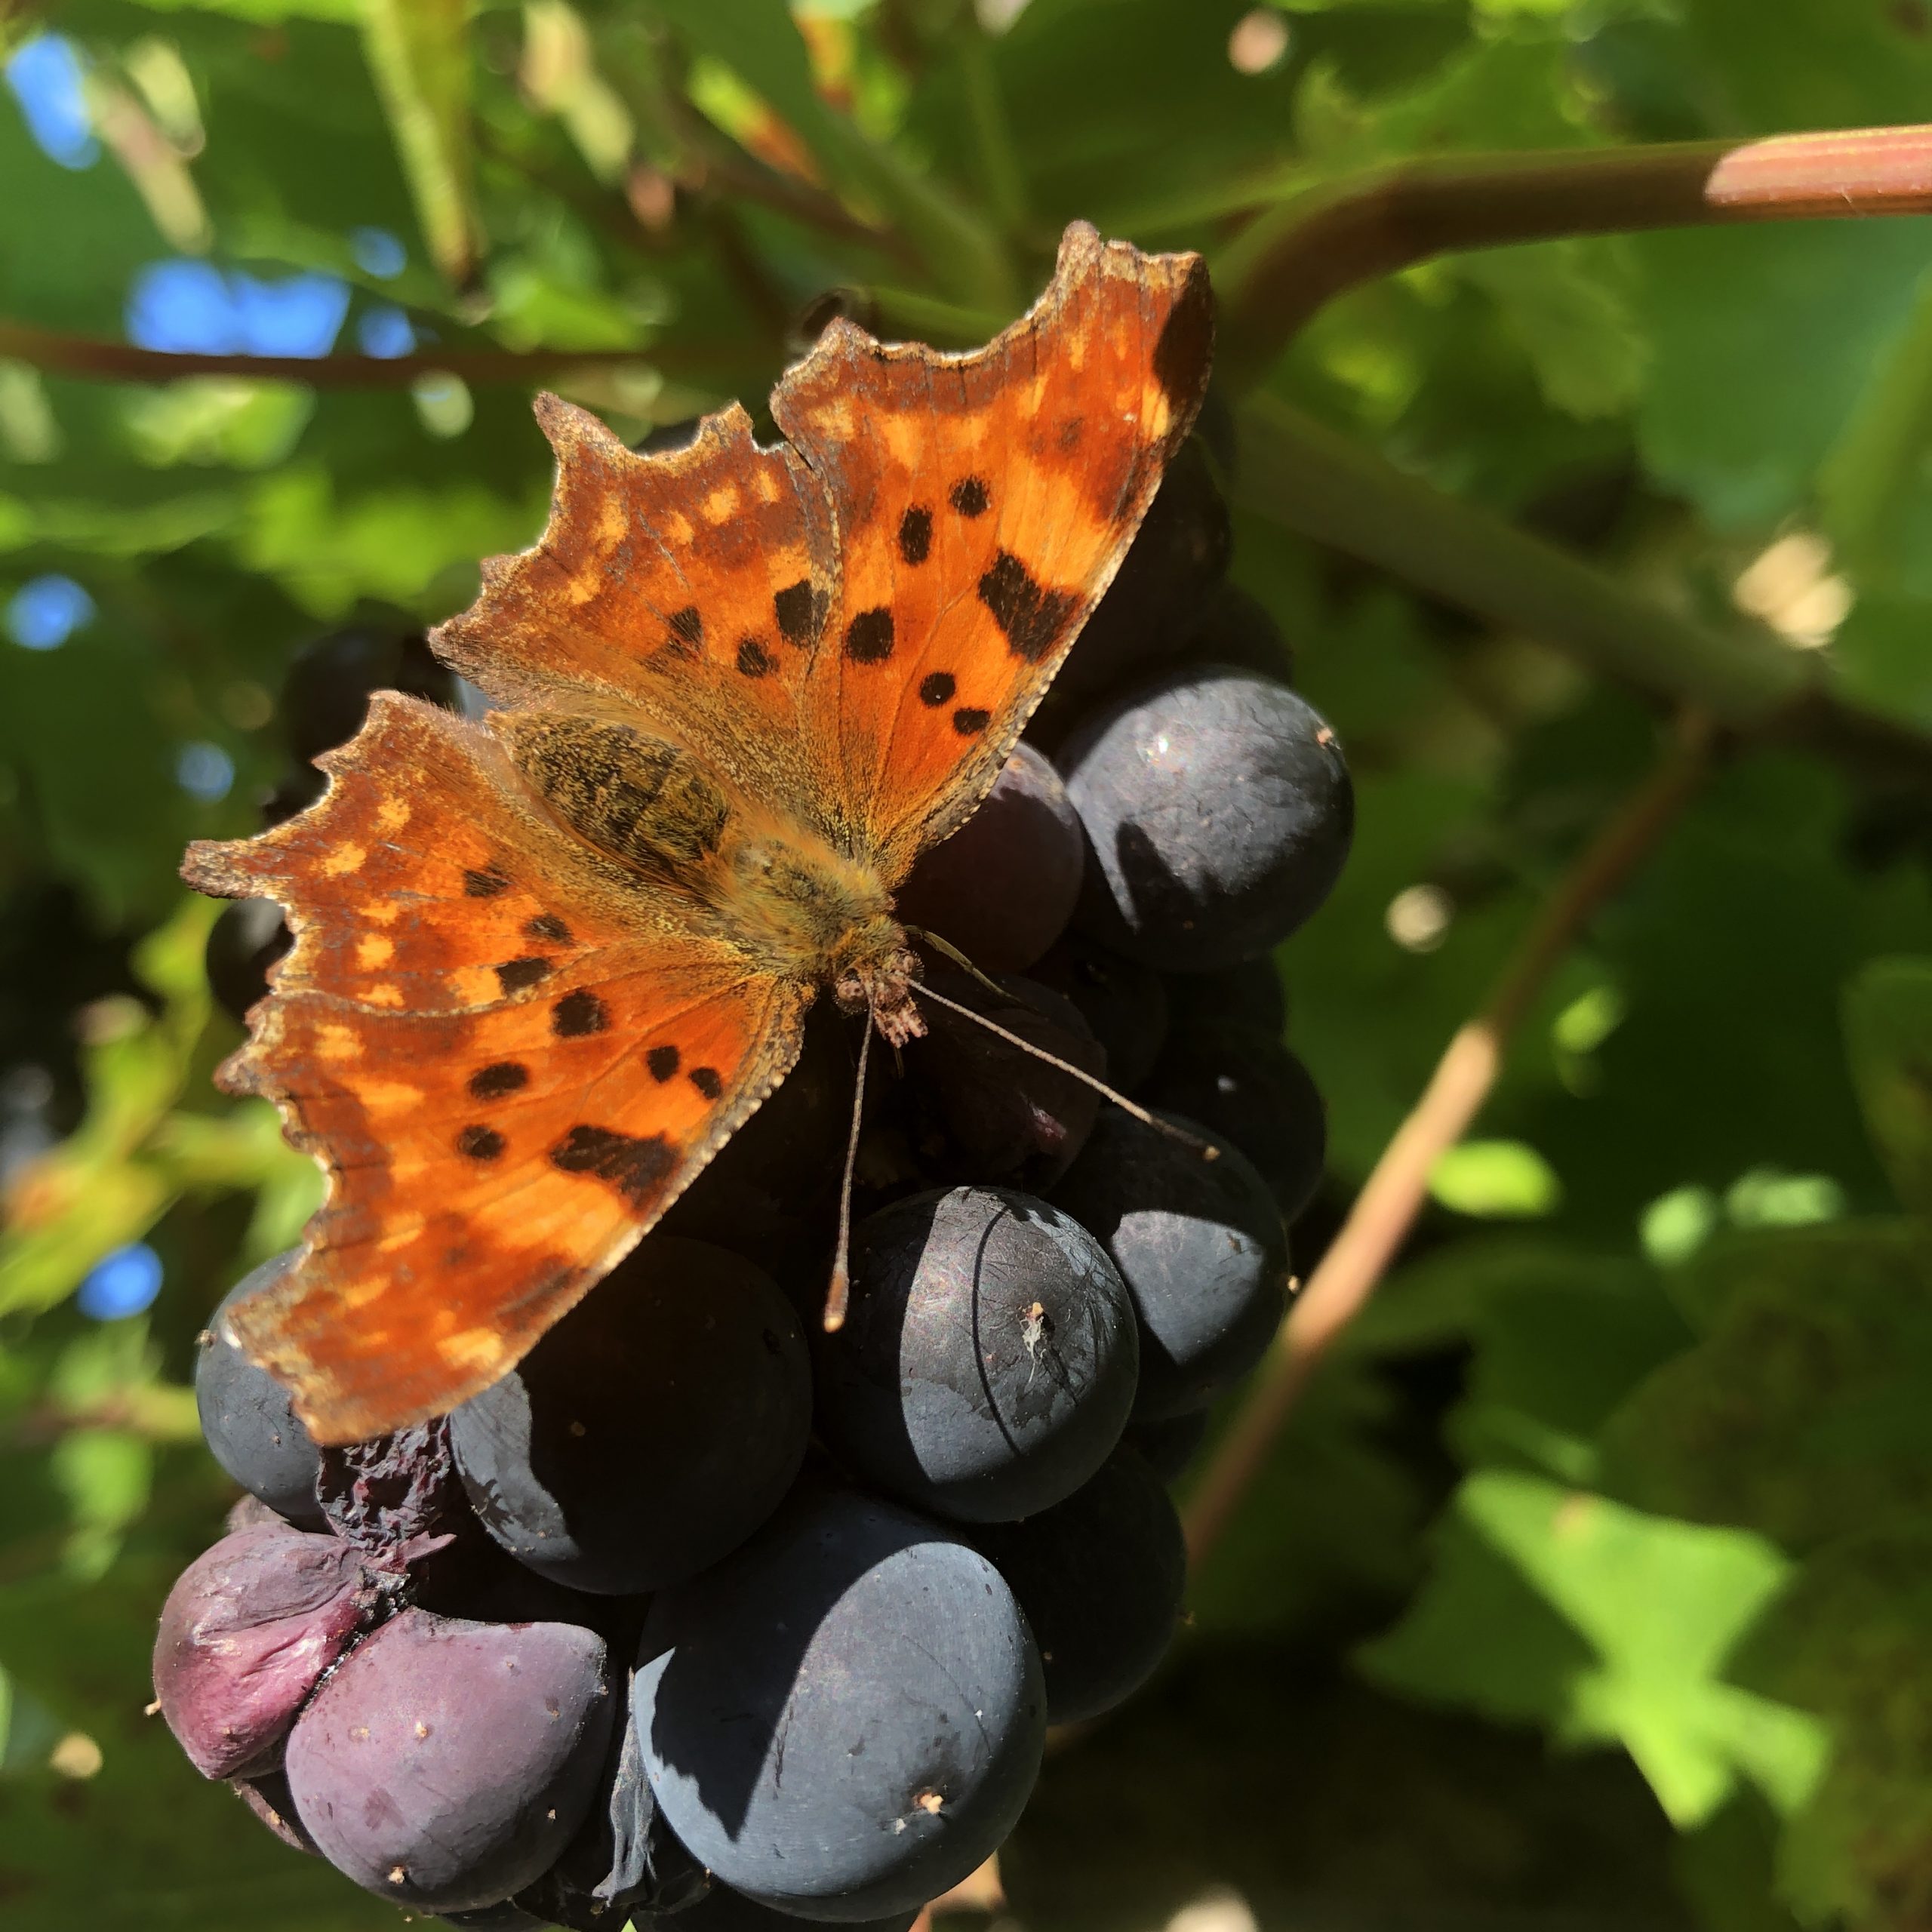 Comma butterfly on grapes